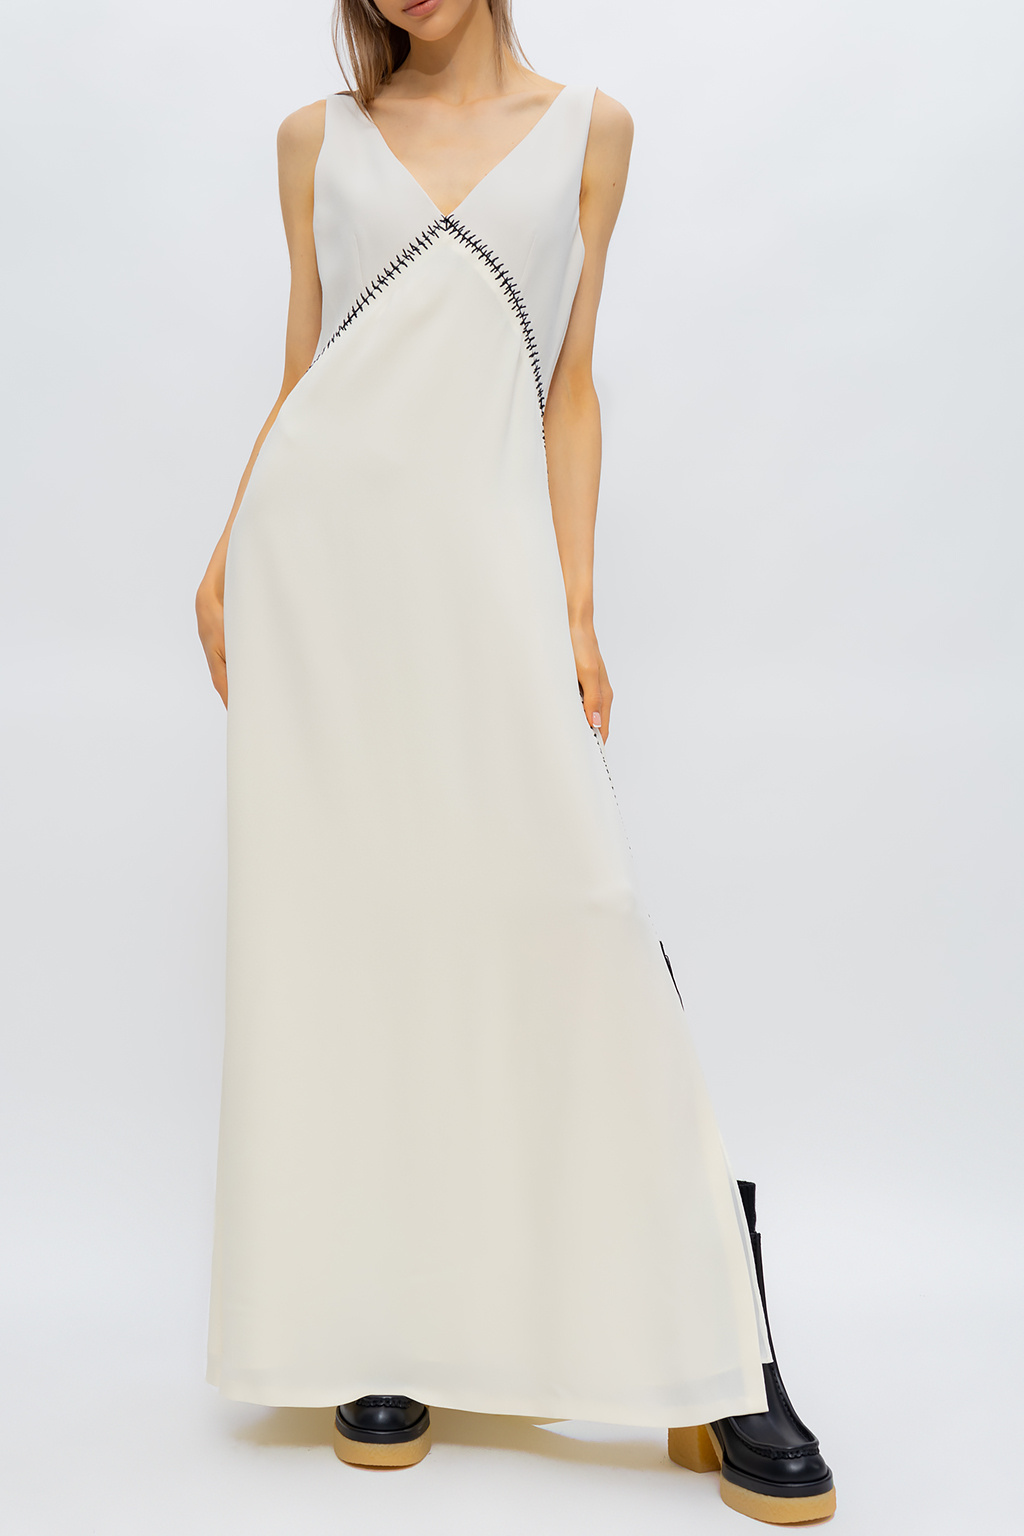 Chloé Maxi dress with stitching details